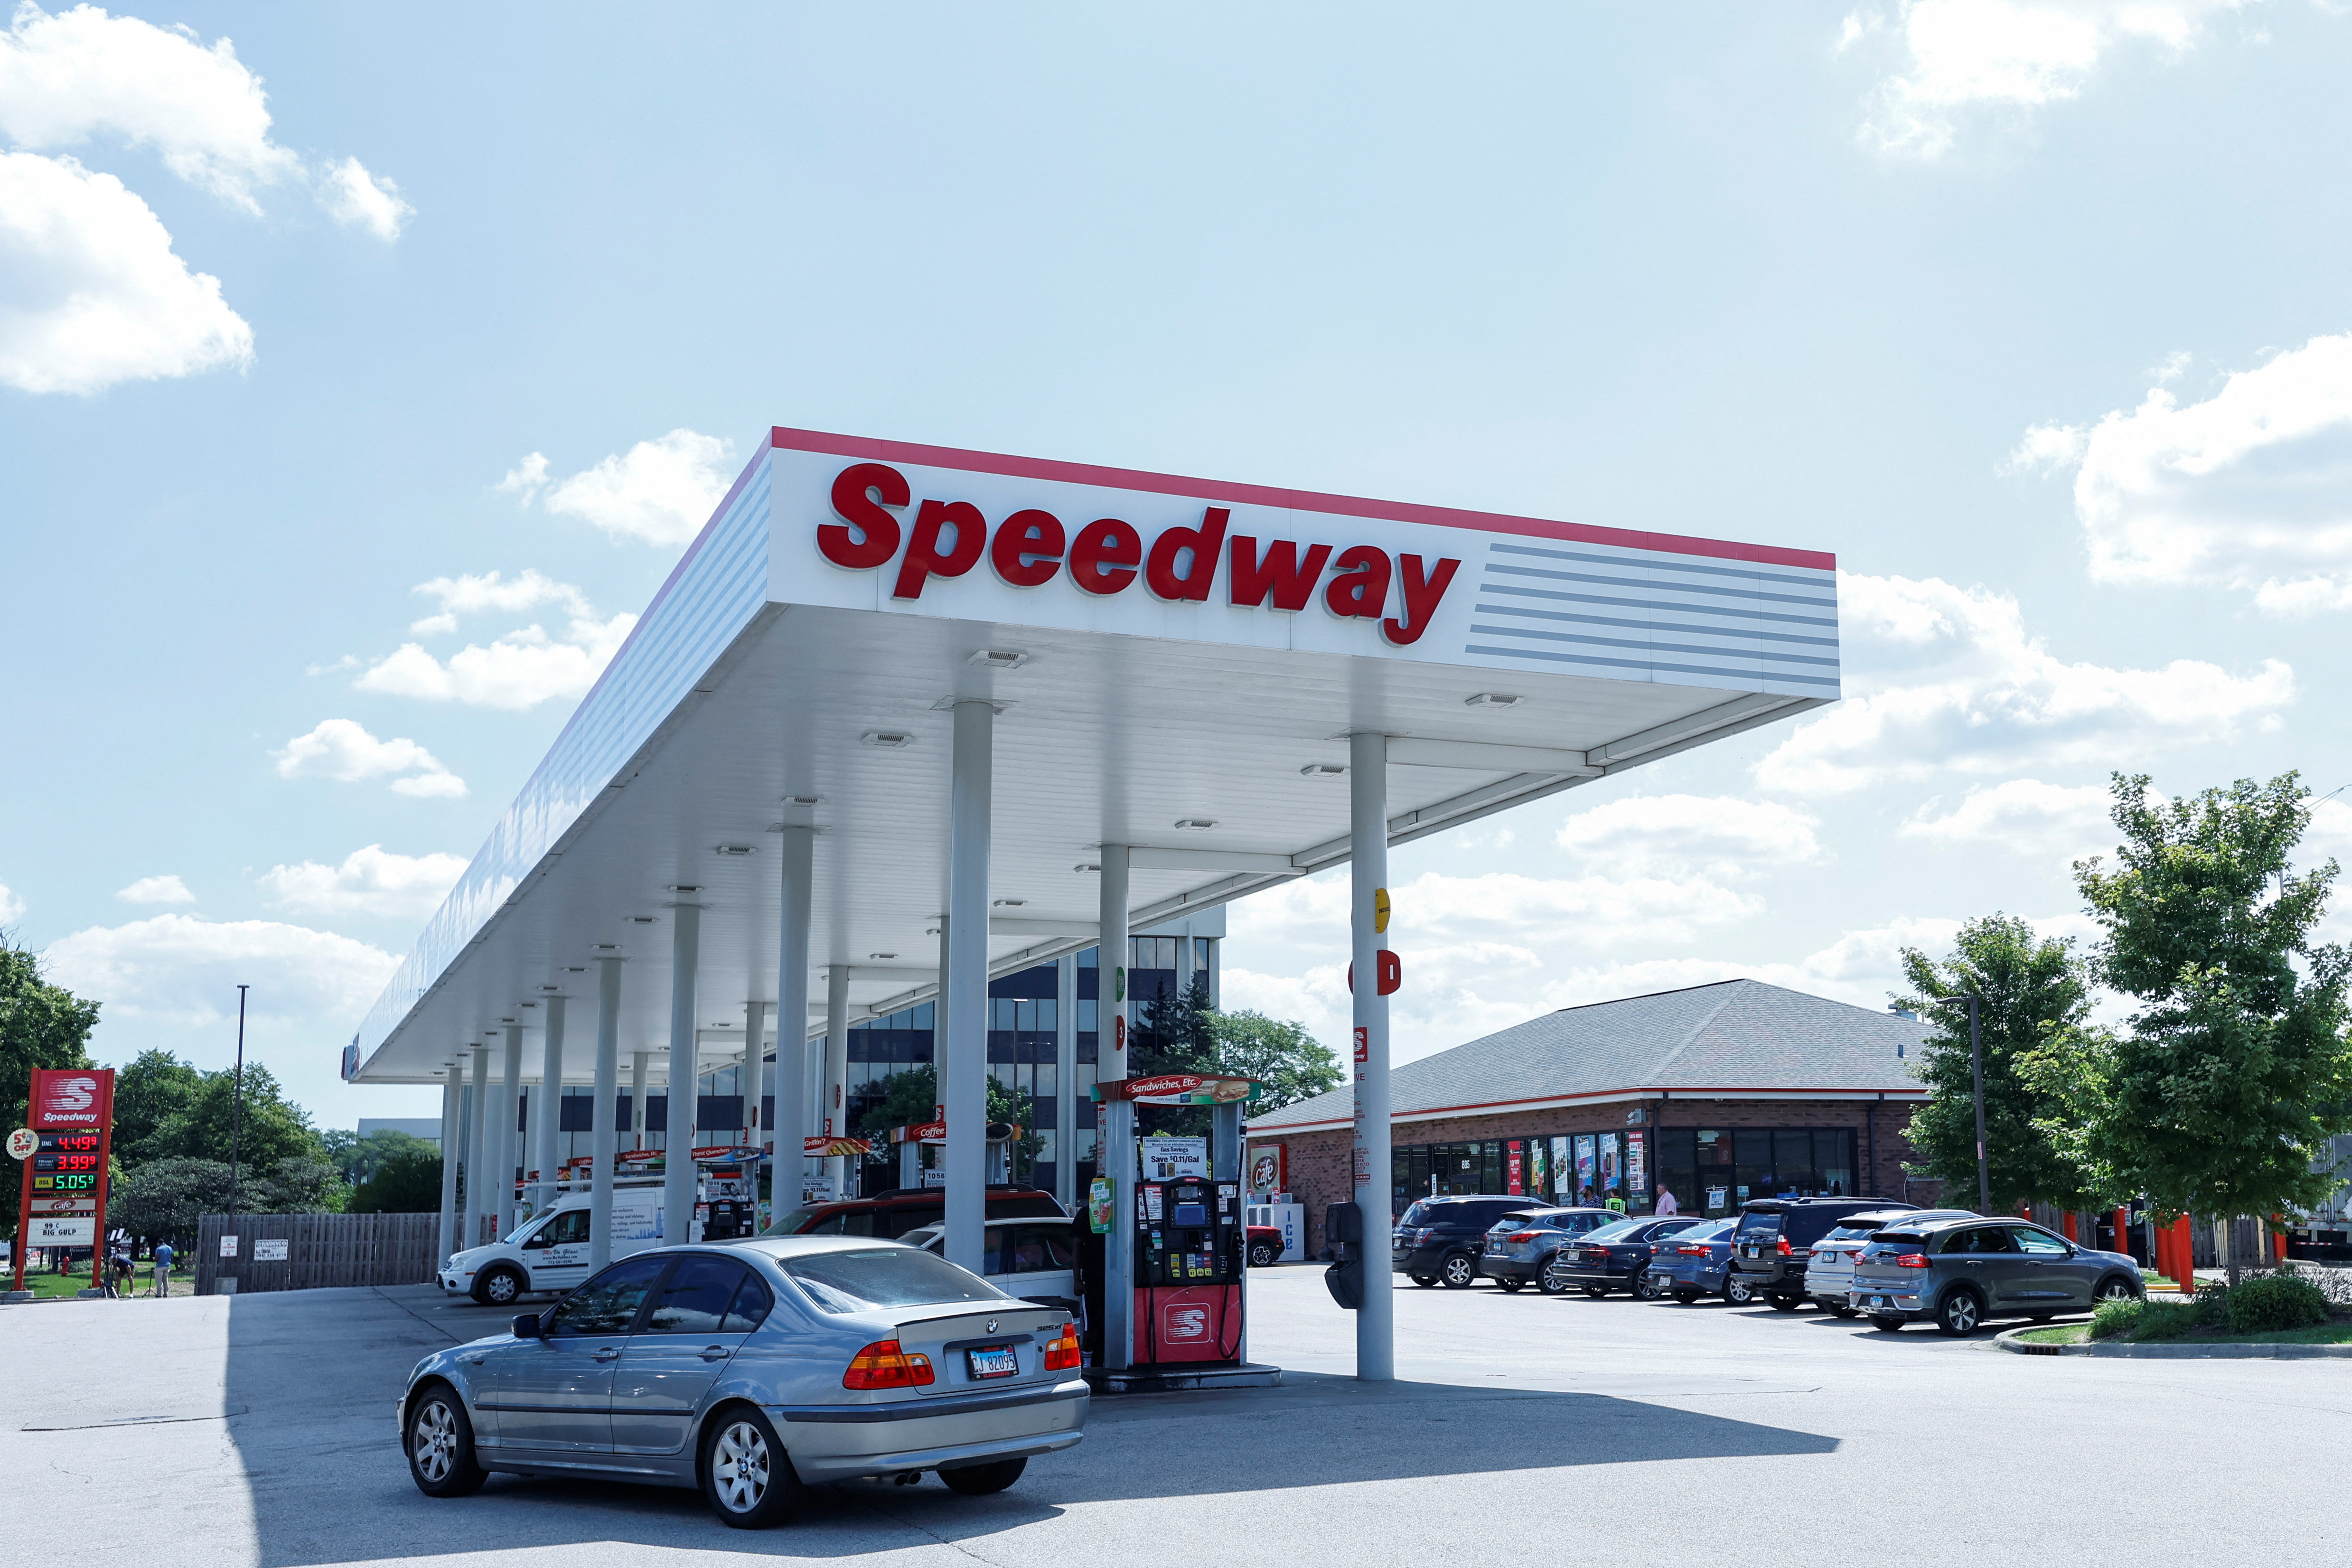 Speedway gas station where the winning ticket for the Mega Millions lottery jackpot was sold, in Des Plaines